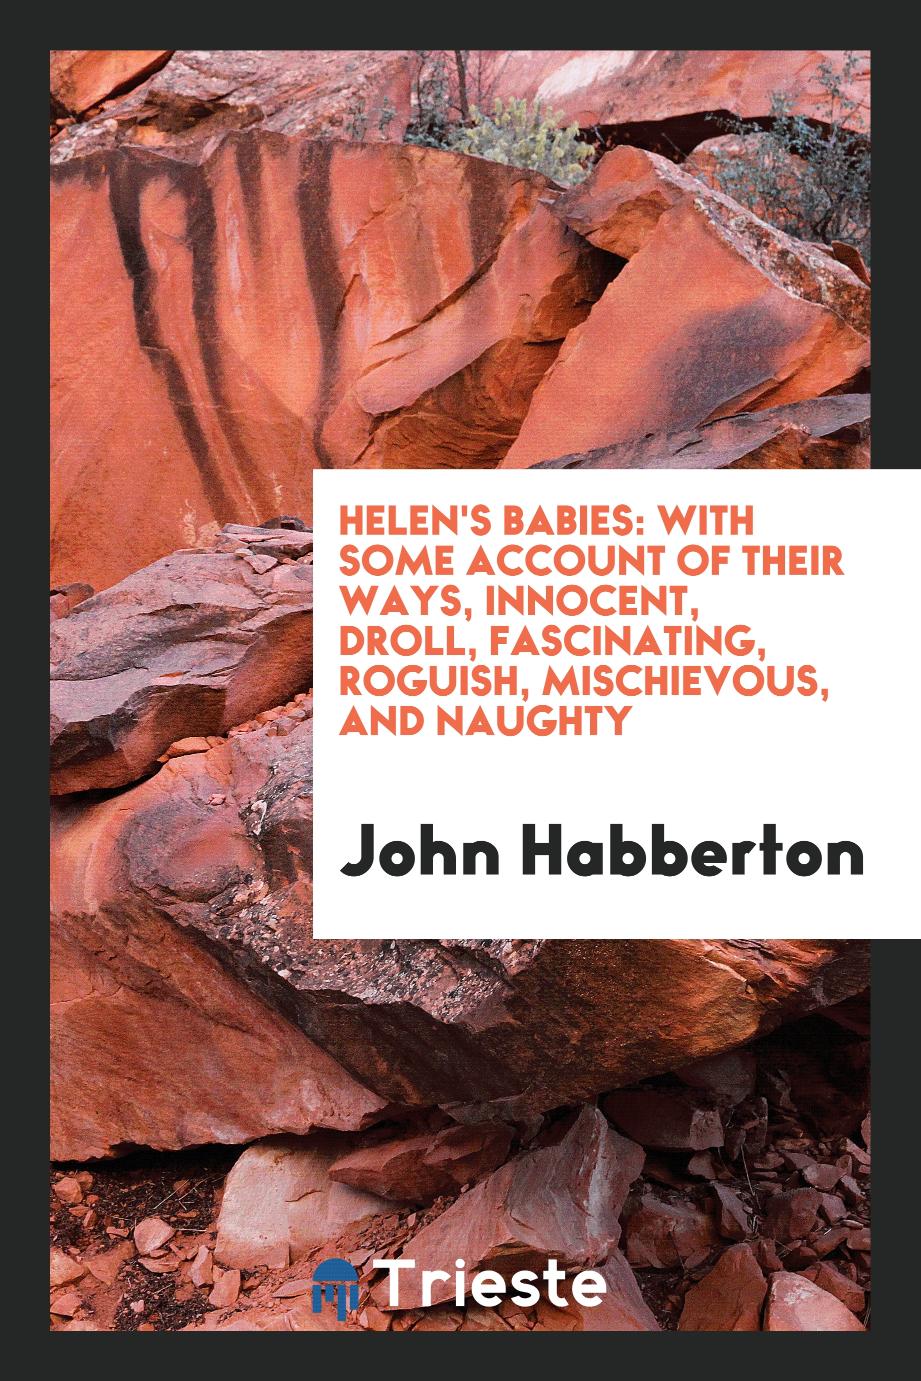 Helen's Babies: With Some Account Of Their Ways, Innocent, Droll, Fascinating, Roguish, Mischievous, And Naughty